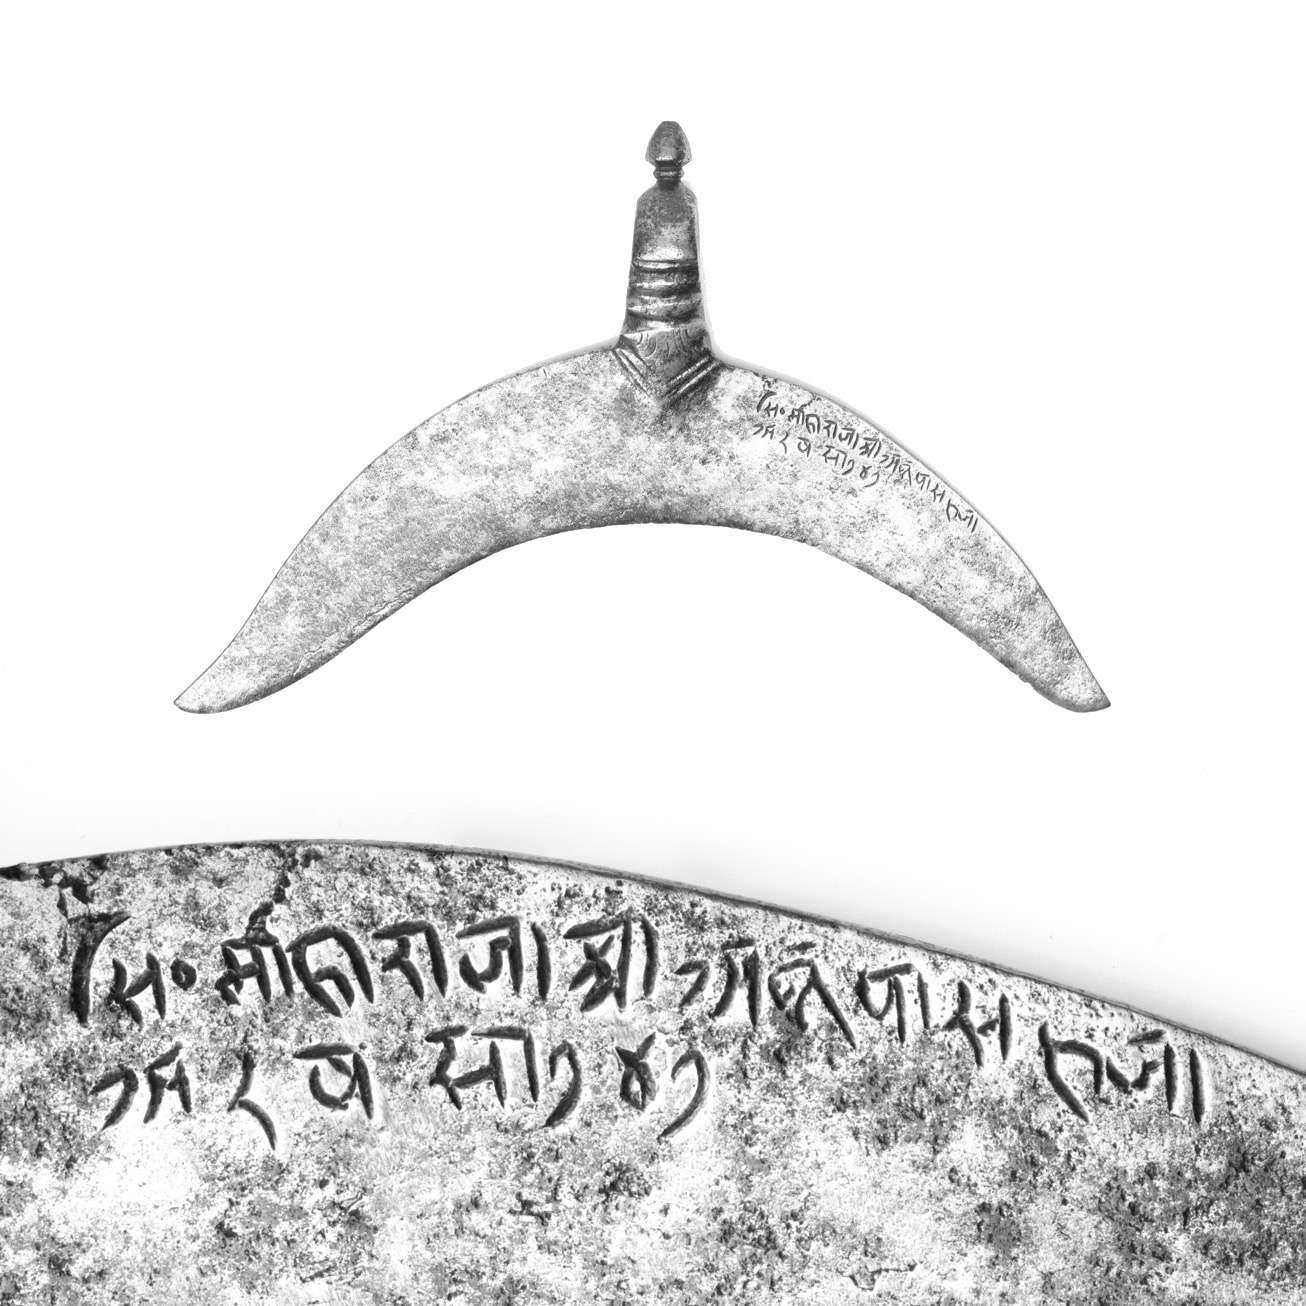 Indian axe with Anup Singh marking